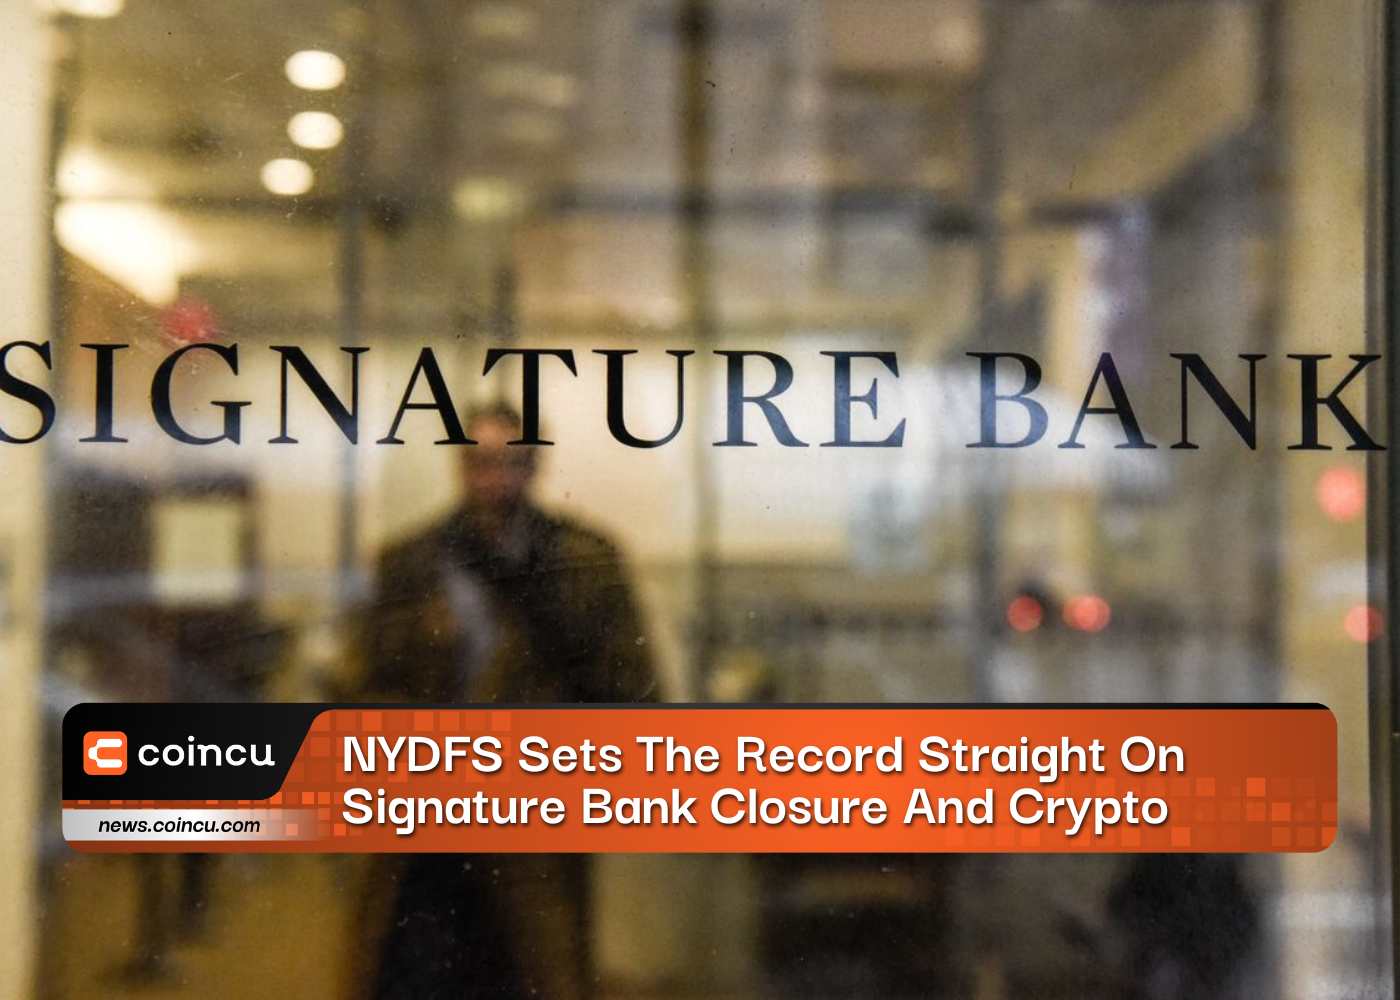 NYDFS Sets The Record Straight On